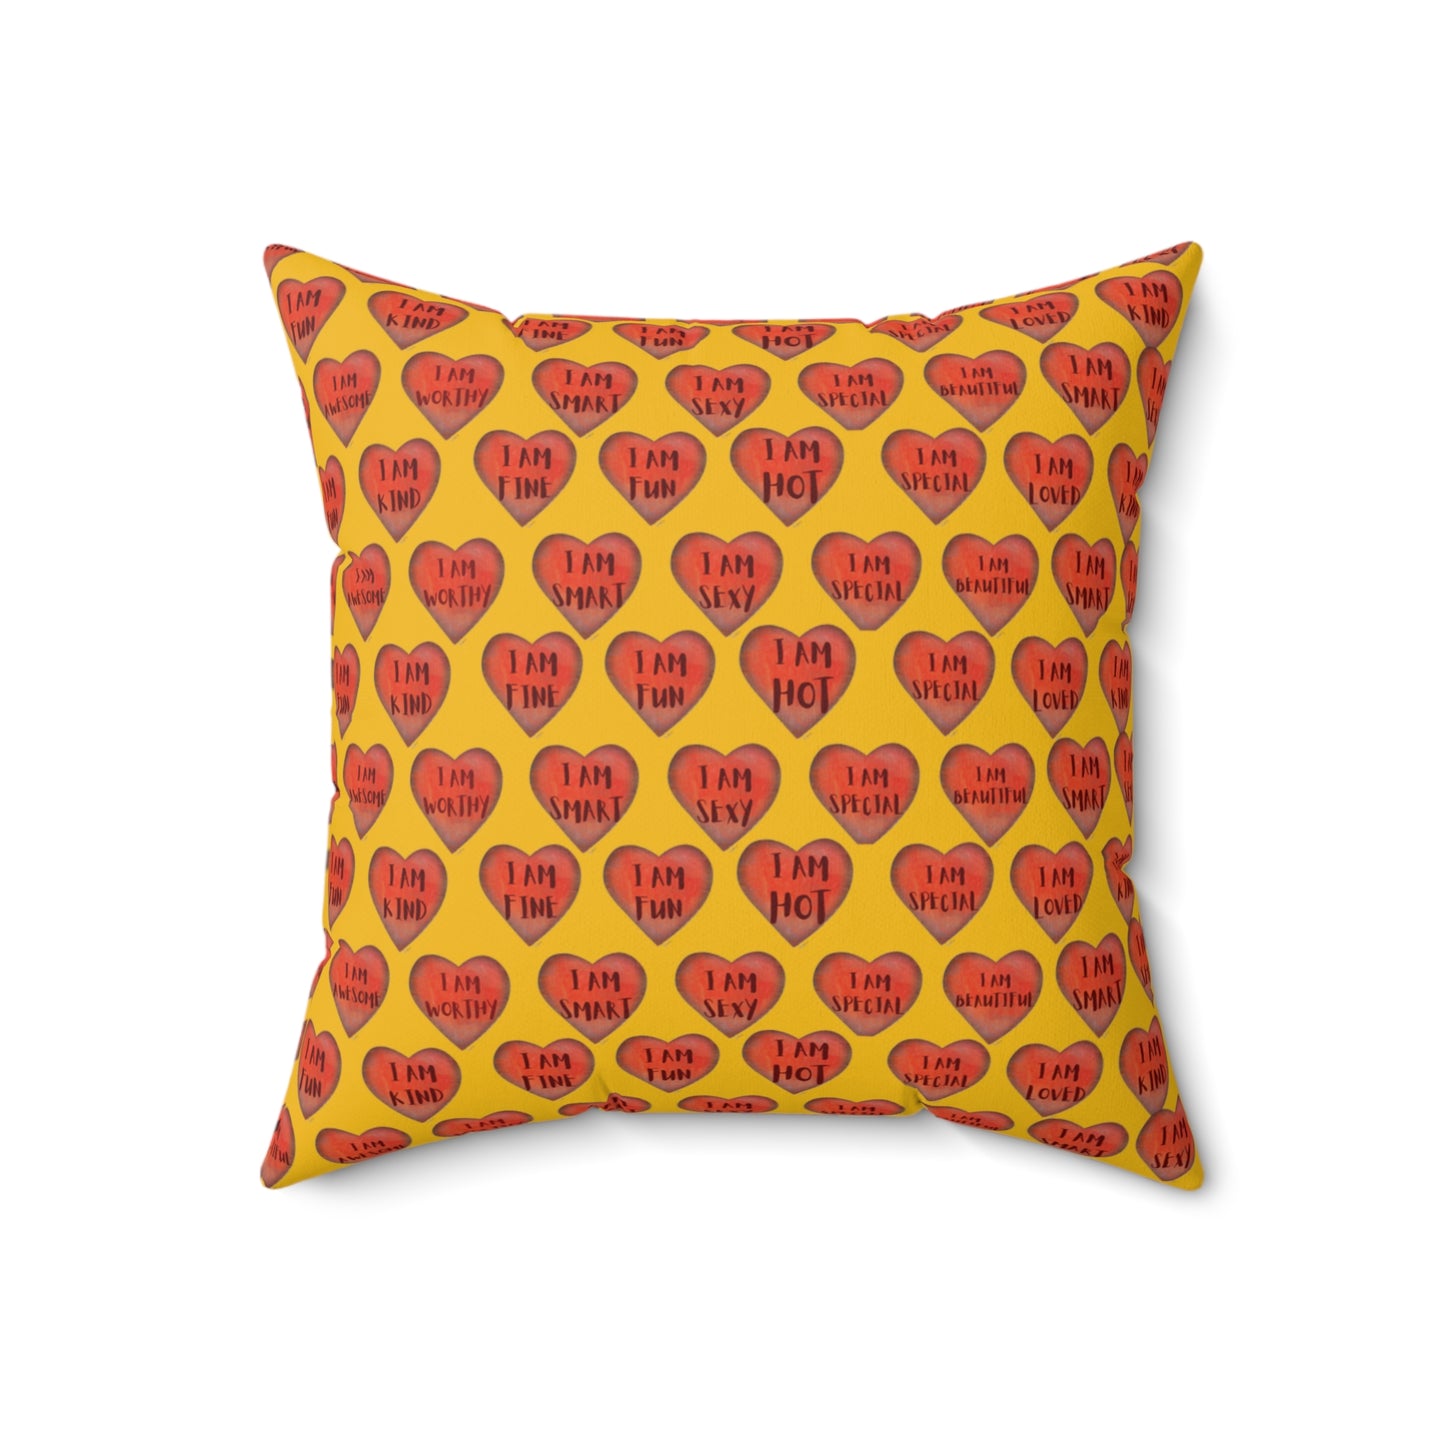 Colorful Faux Suede Pillow - Red Heart motivational pillow - Yellow Throw Pillow - Inspirational Decorative pillow